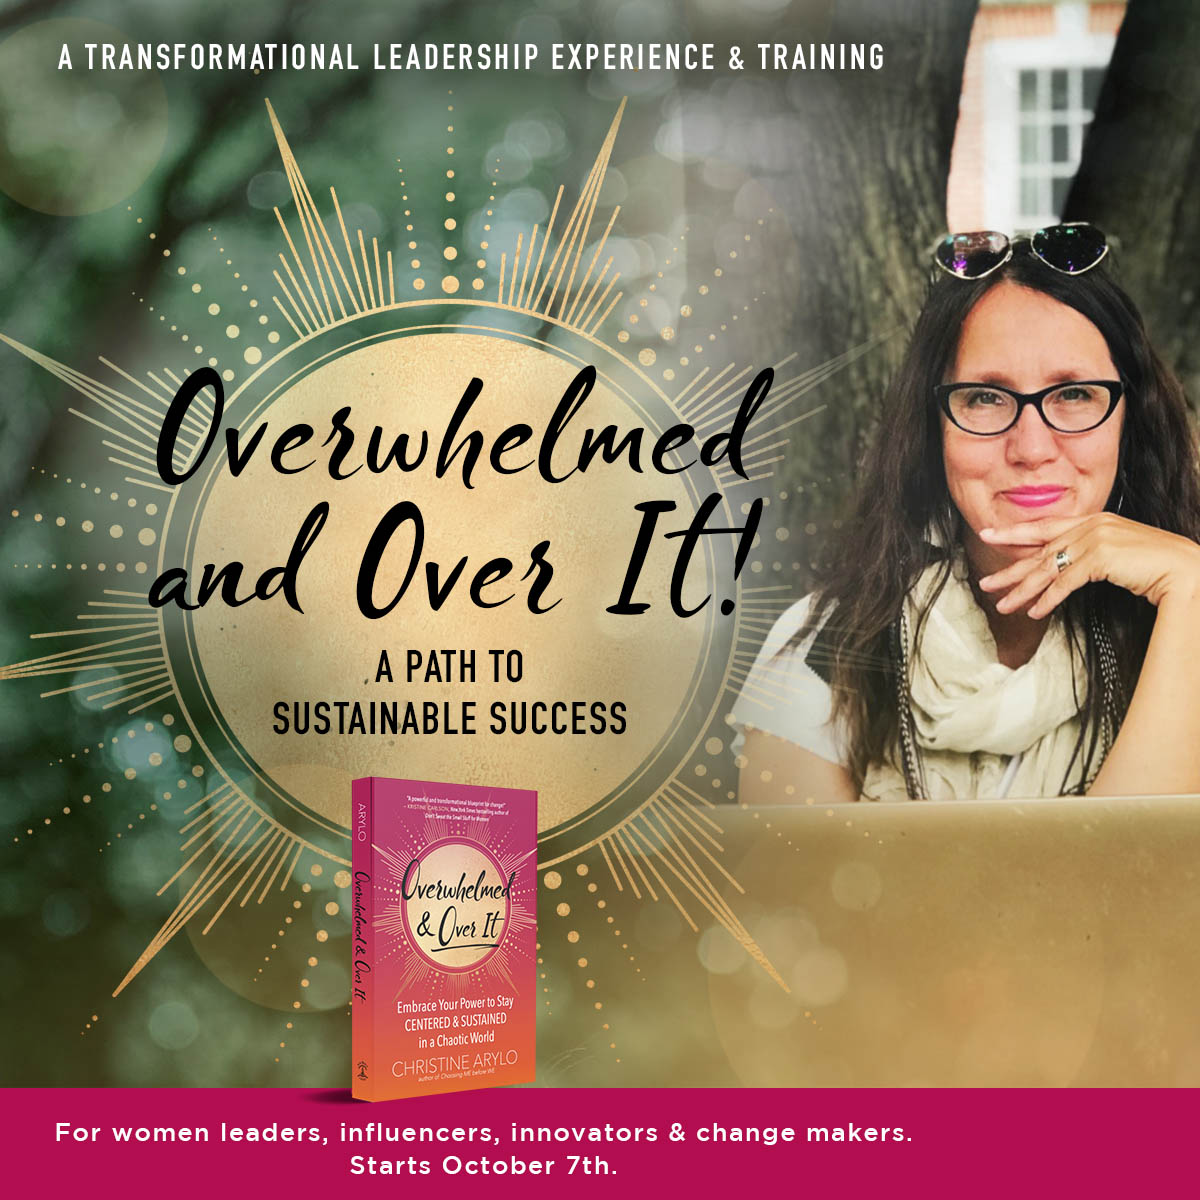 Overwhelmed and Over It : A path to sustainable success with Christine Arylo